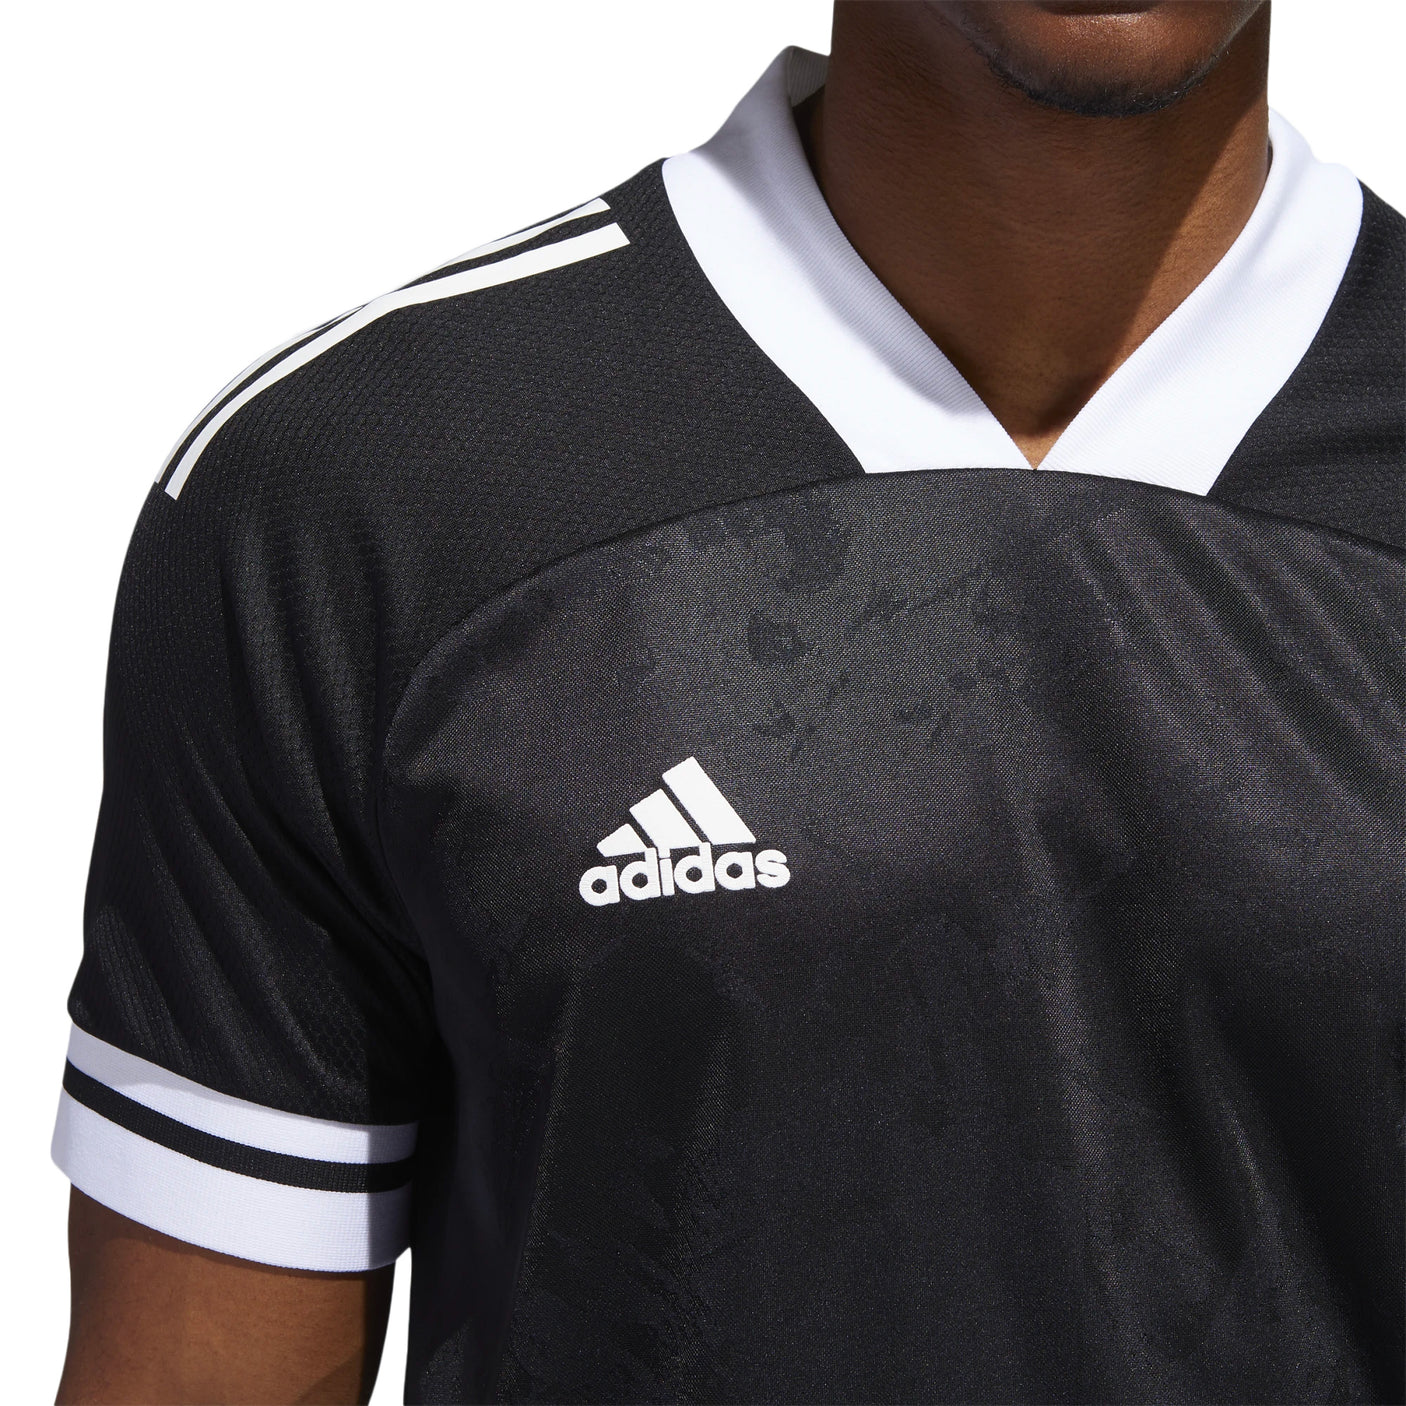 adidas Men's Condivo 20 Jersey Black/White Front Zoomed